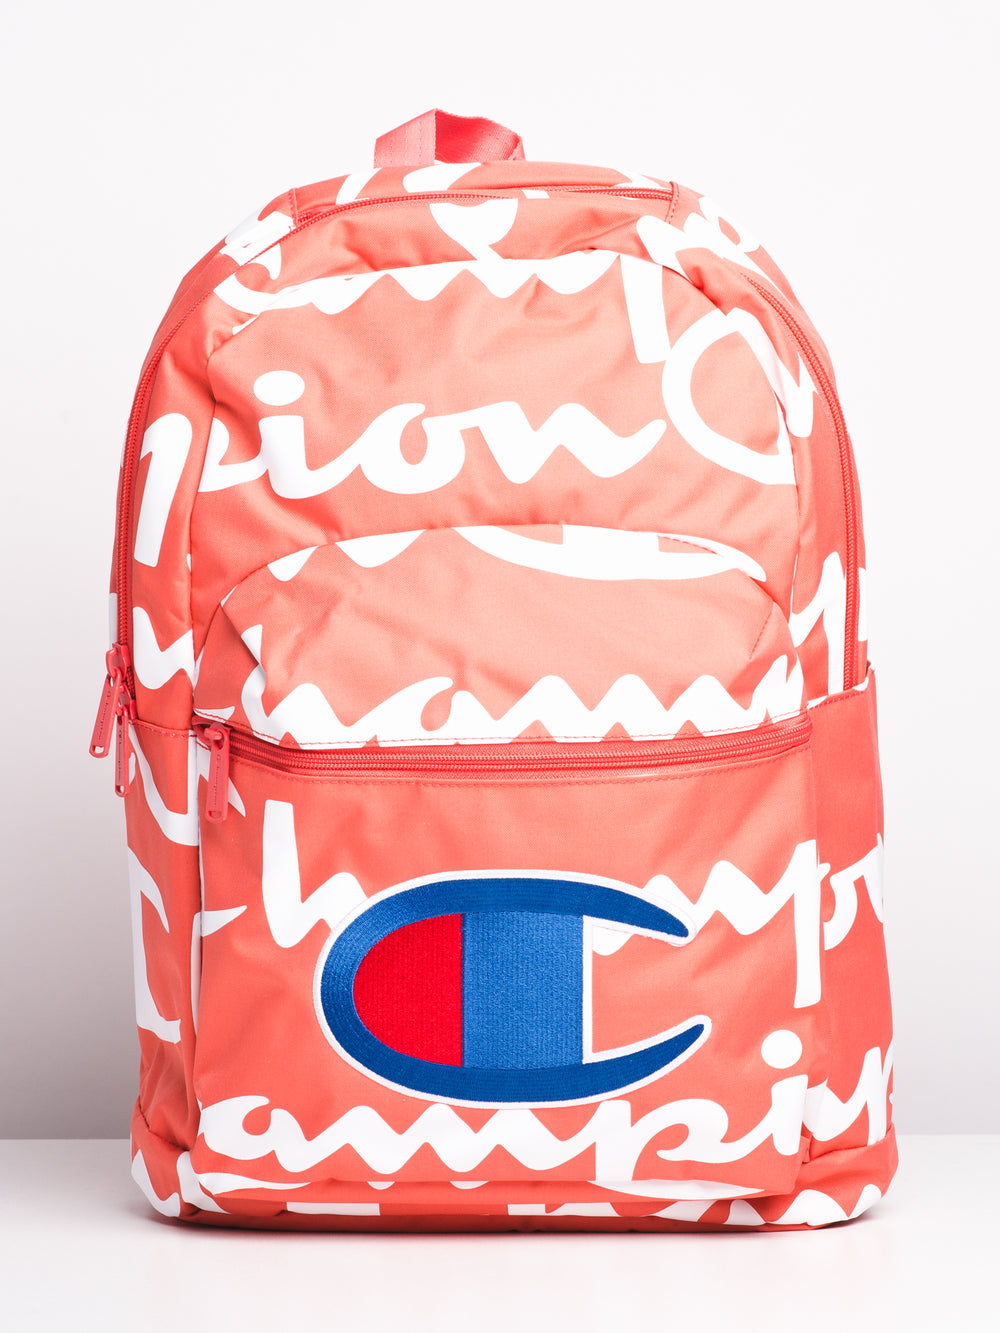 SUPERCIZE 2.0 BACKPACK - CORAL - CLEARANCE